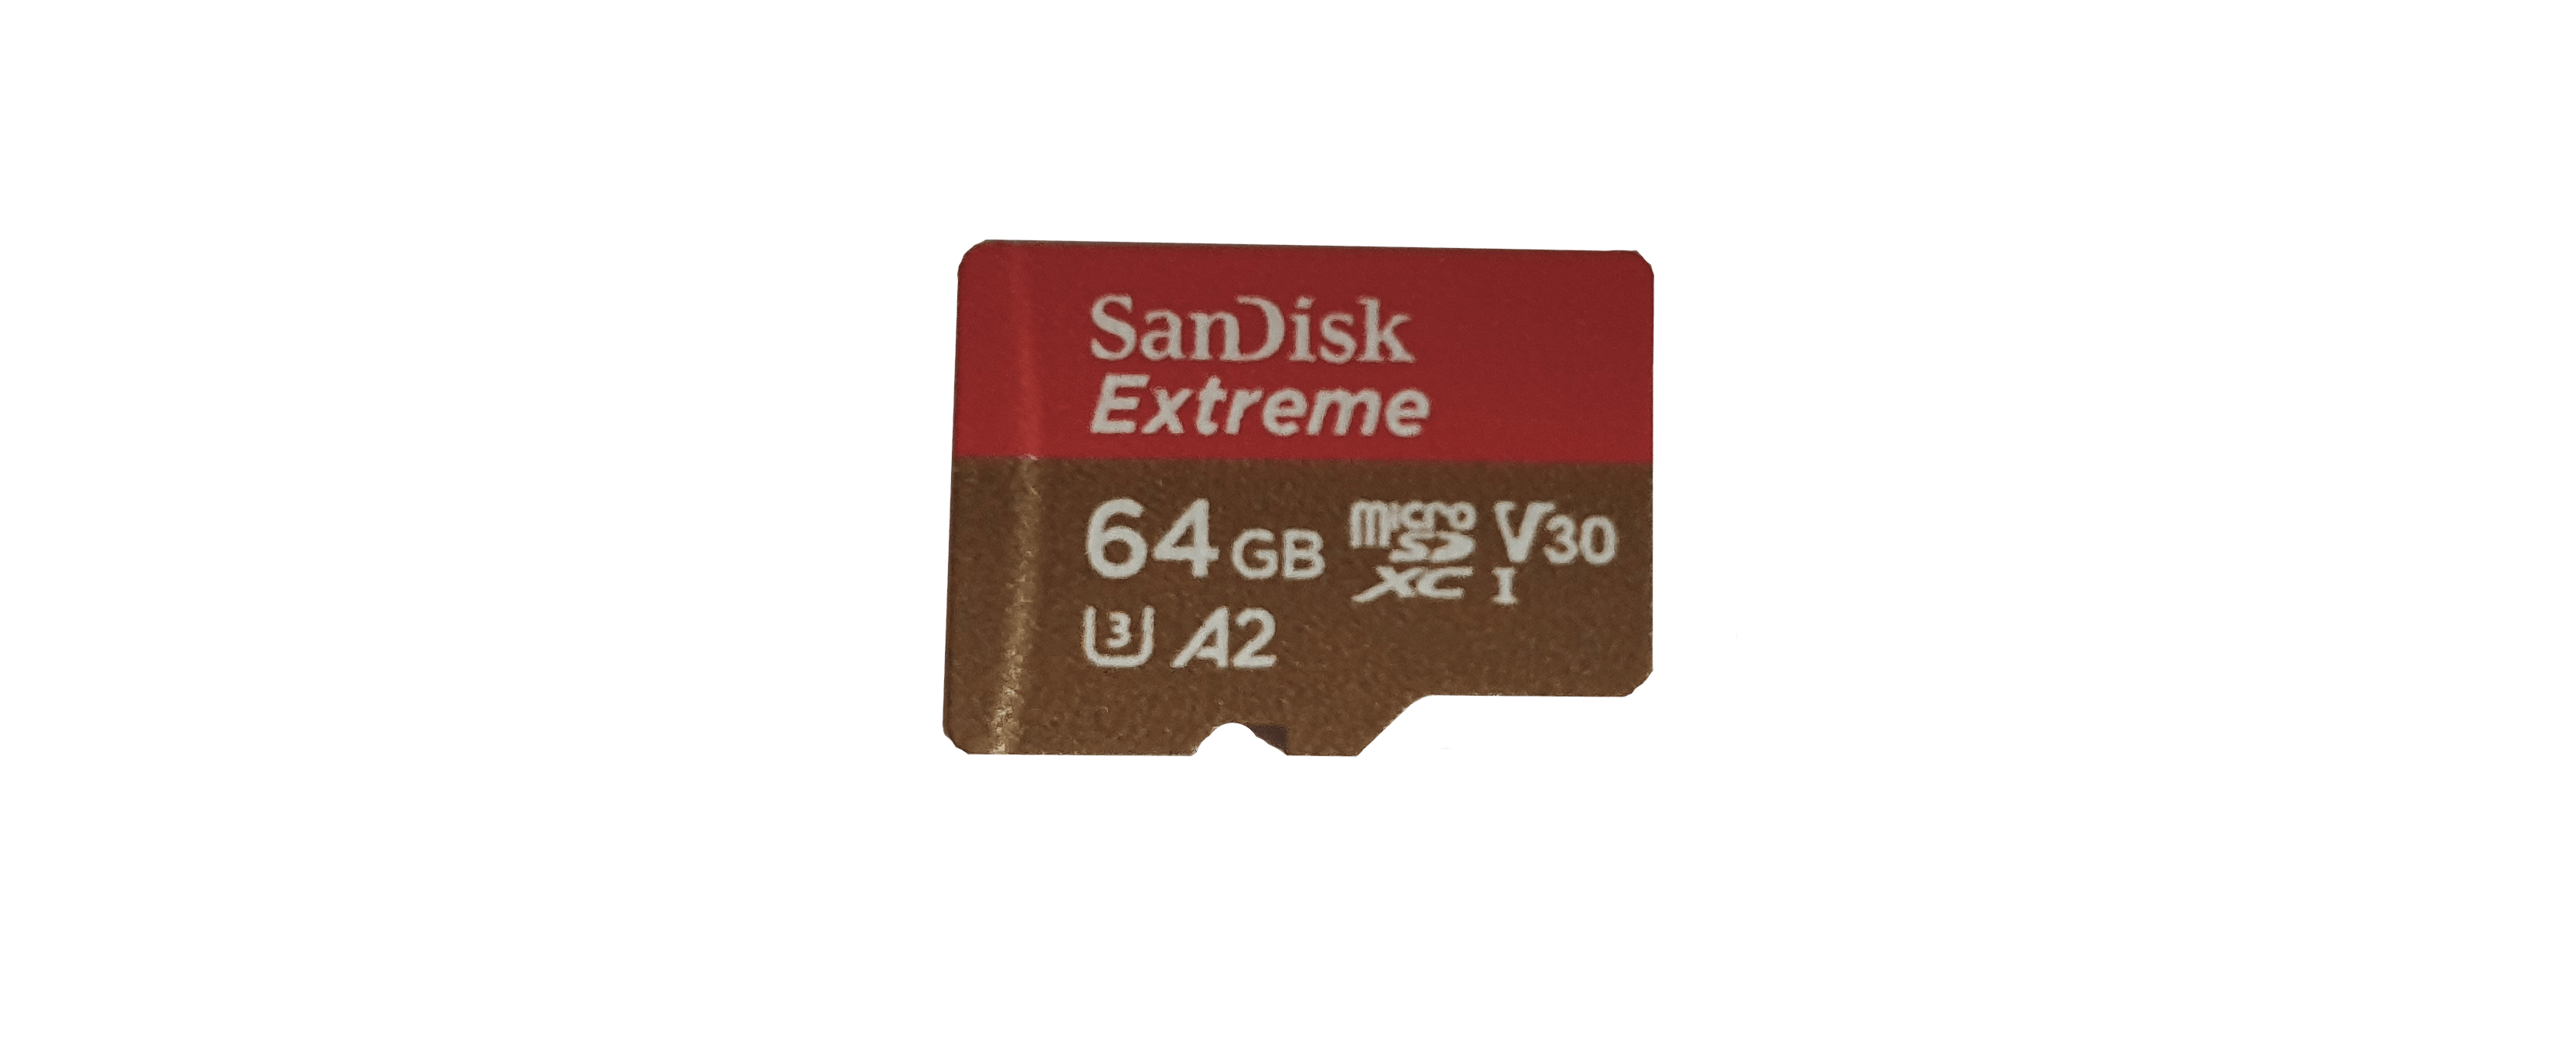 To visualize, this picture shows a 64GB - Class 10 Micro sd card